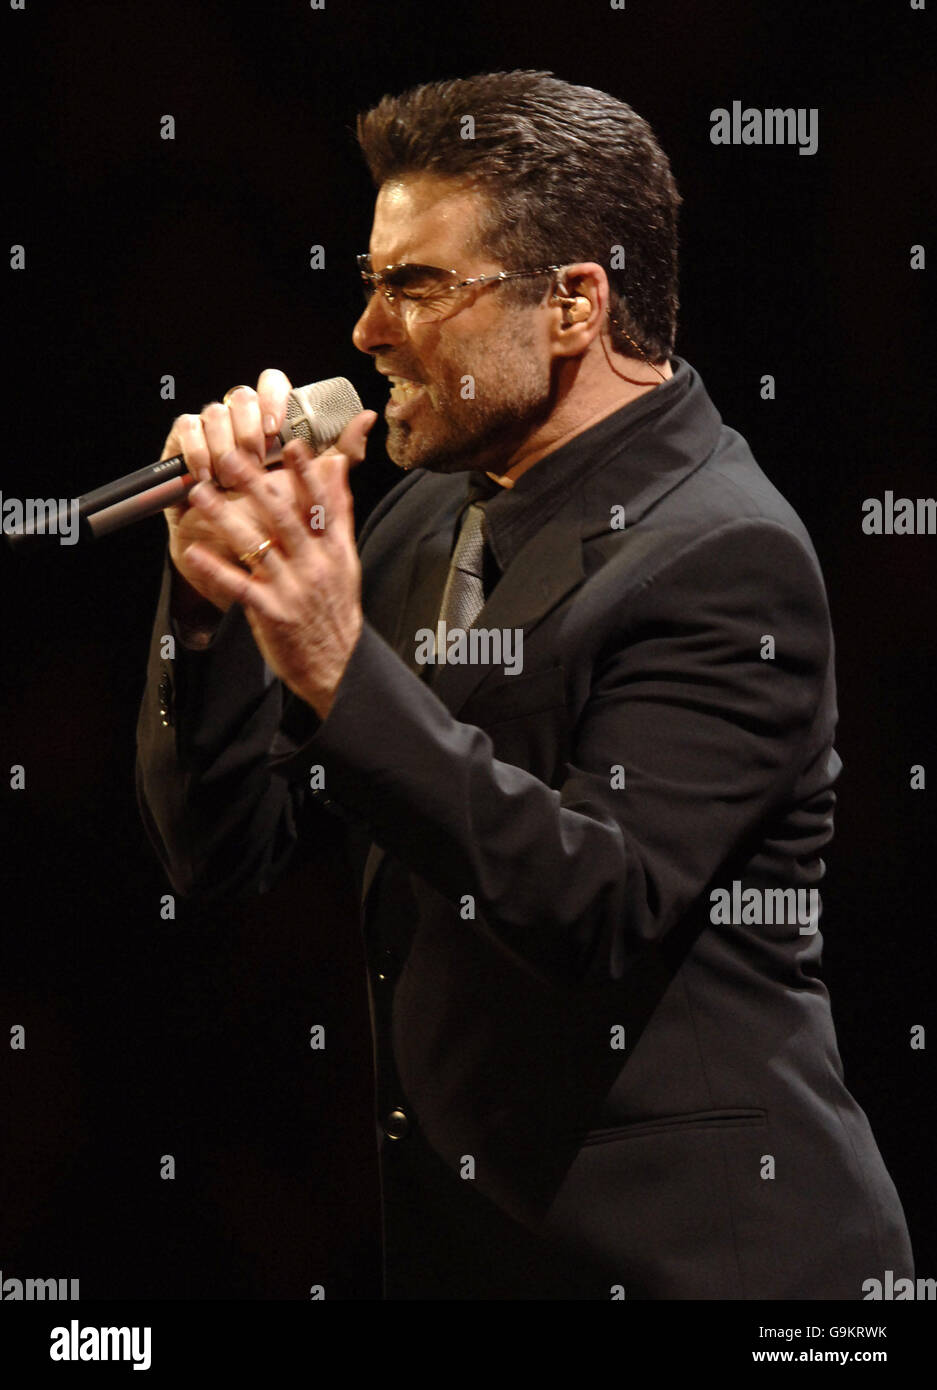 George Michael performs in Manchester. Singer George Michael performs at the MEN Arena in Manchester during his '25 Live' world tour. Stock Photo